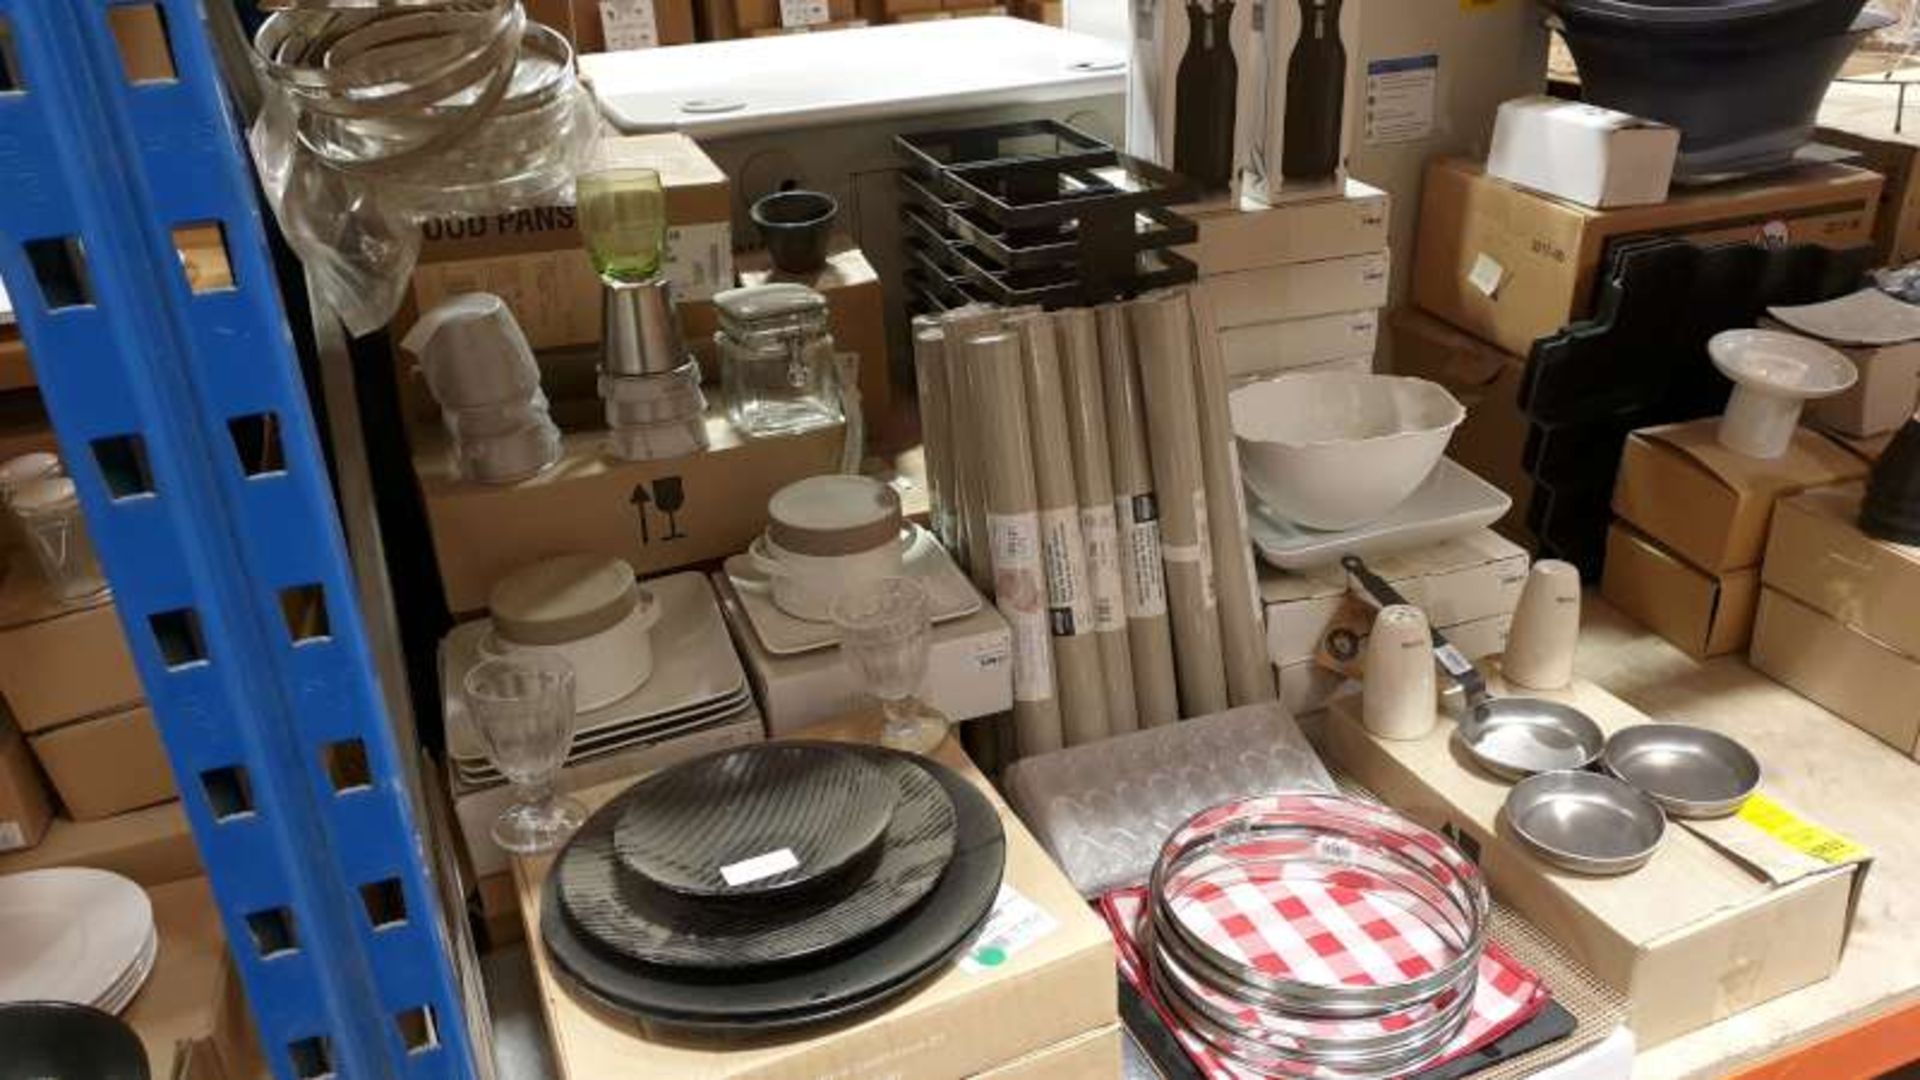 LOT CONTAINING A LARGE QTY OF VARIOUS HOTEL / RESTAURANT CROCKERY AND DINING UTENSILS